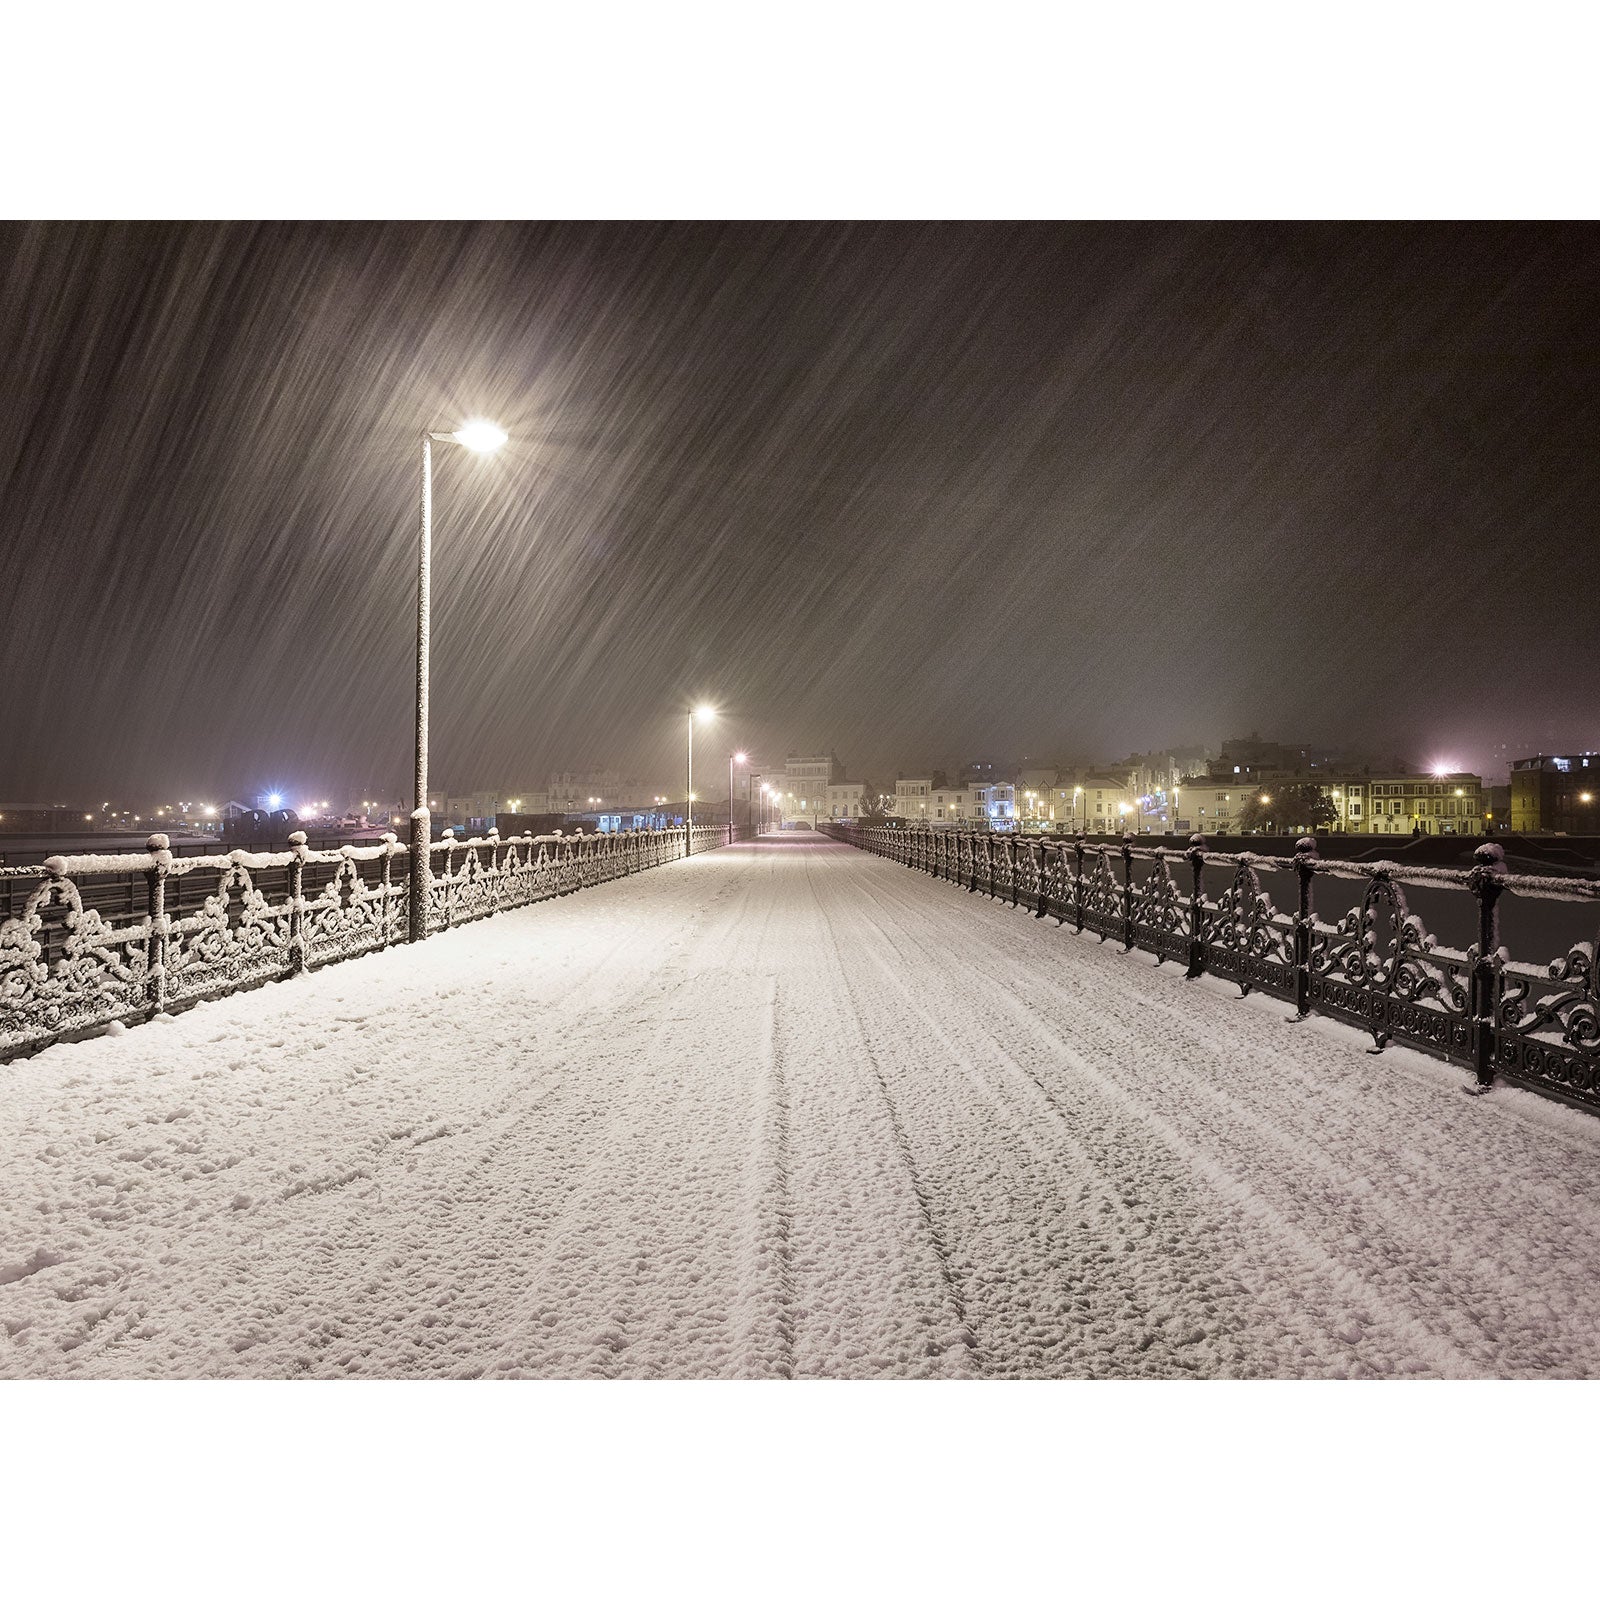 A snow-covered Ryde Pier in the snow at night, illuminated by streetlights with snowflakes falling on the Isle of Wight by Available Light Photography.